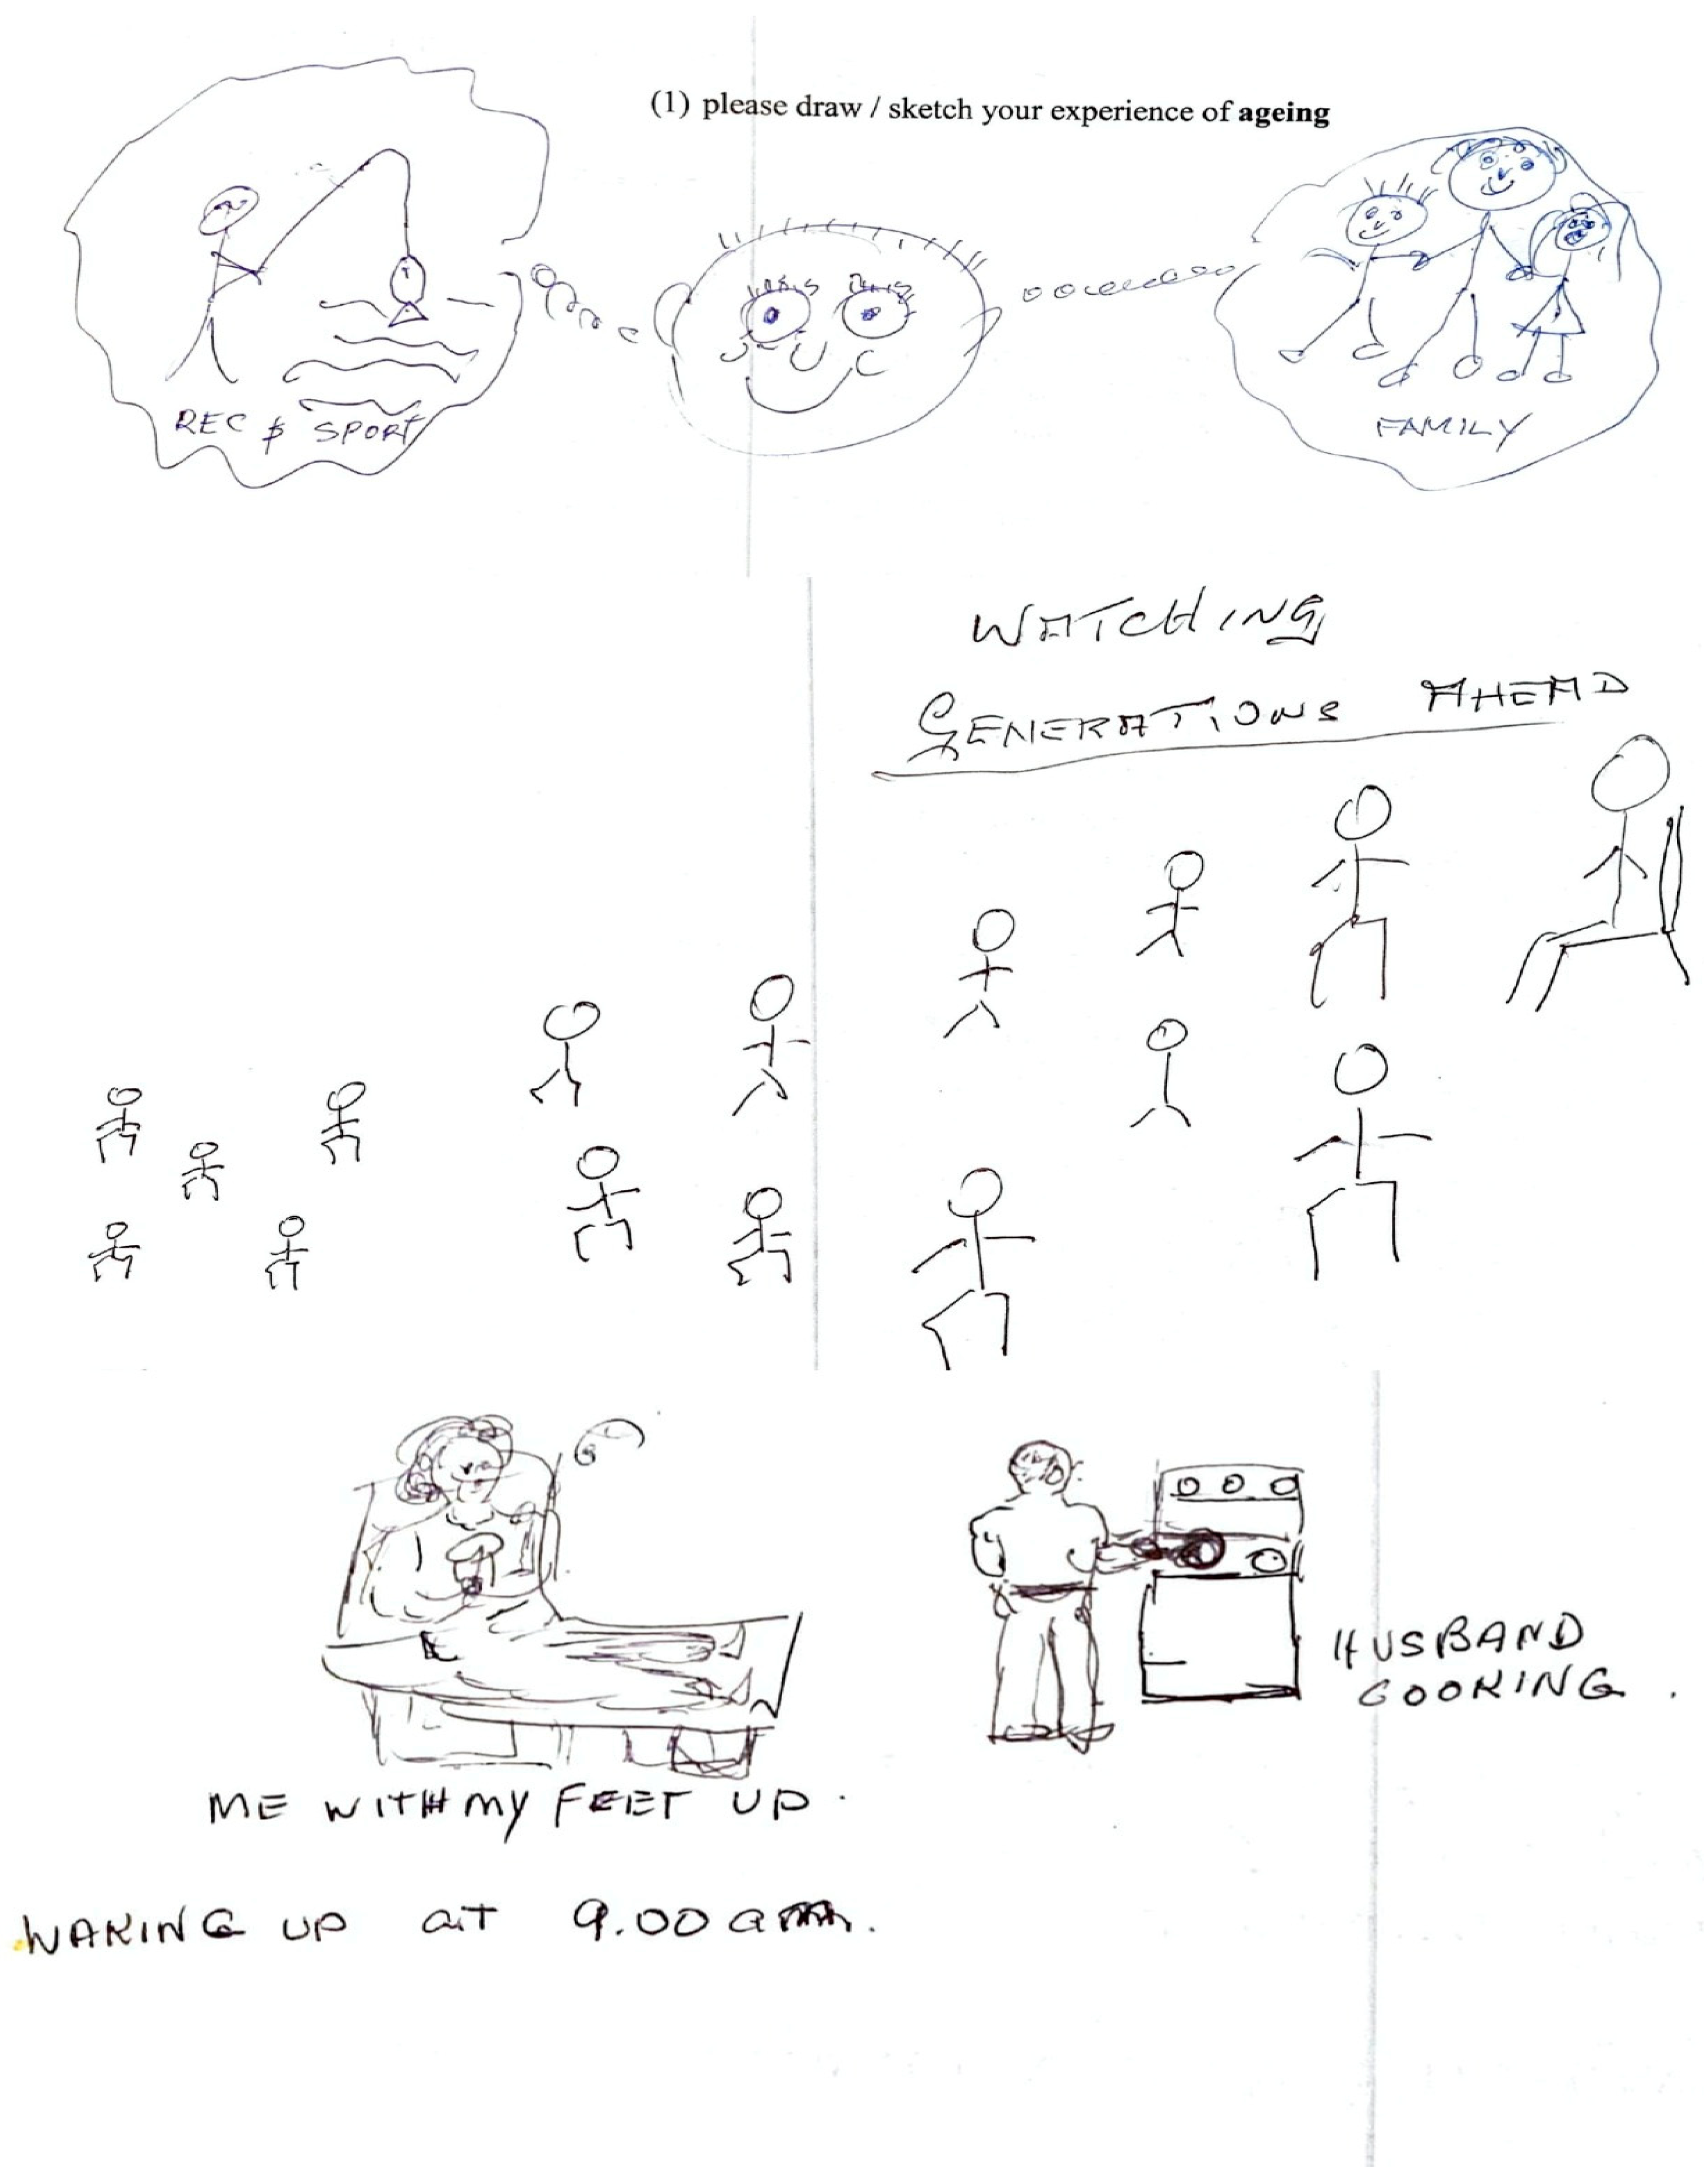 Reading Family Clip Arts - Drawing Of A Nuclear Family, HD Png Download ,  Transparent Png Image - PNGitem